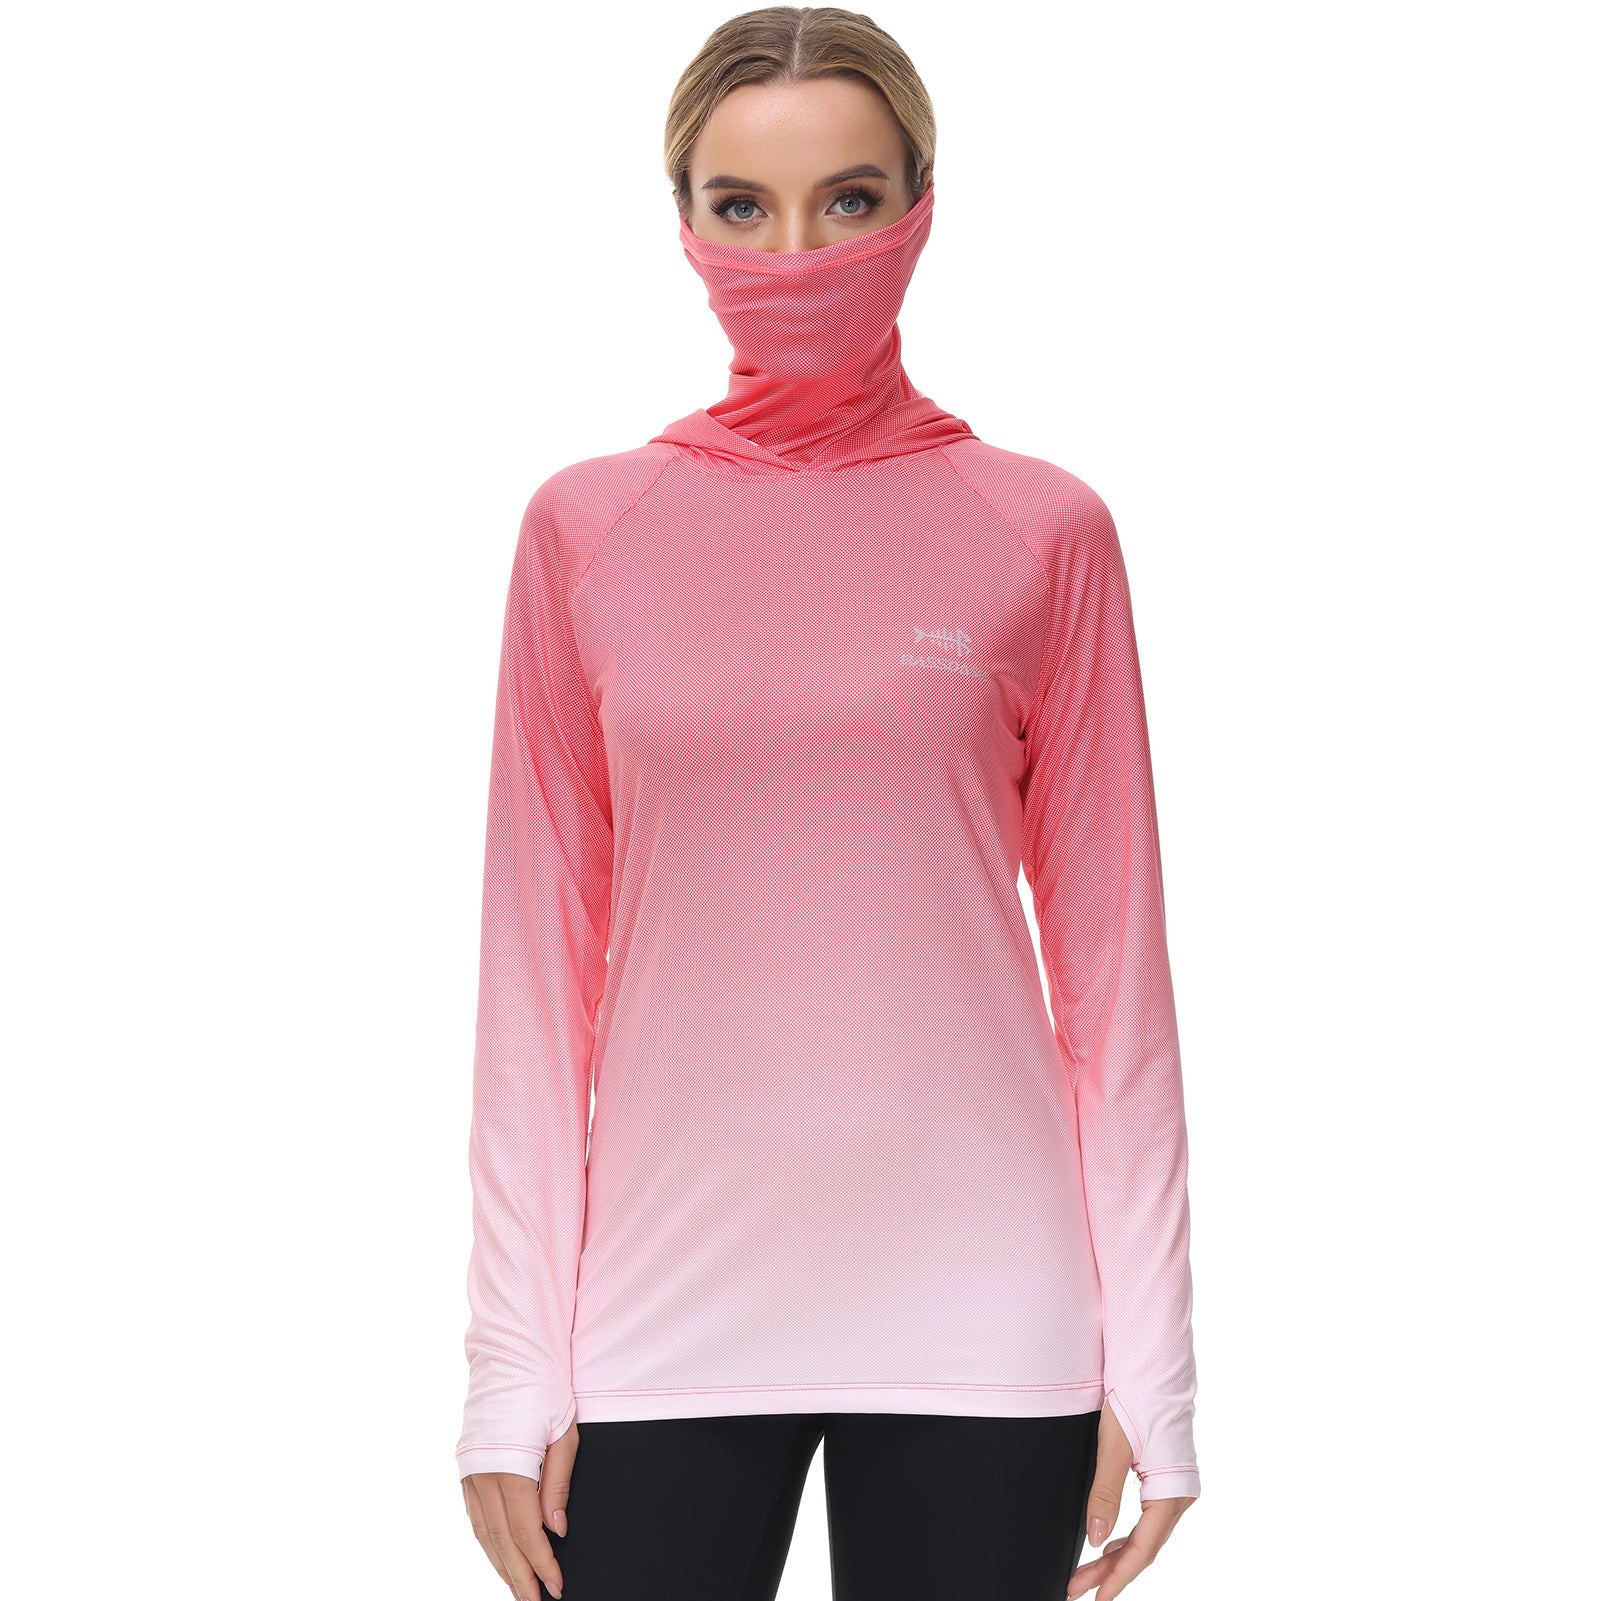 Women's Hooded Fishing Shirt with Face Mask